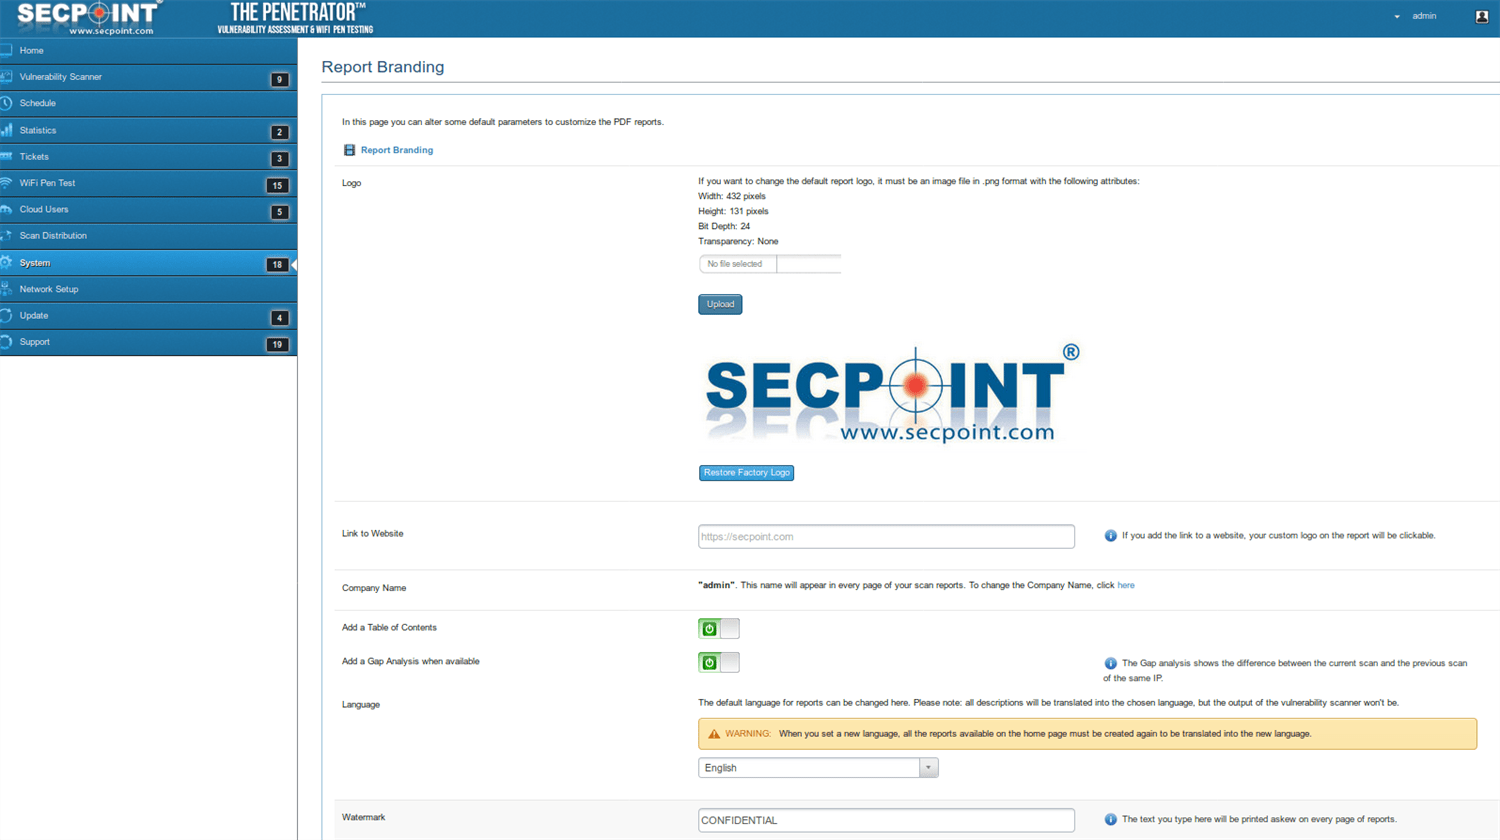 SecPoint Penetrator S9 - 4 IP Concurrent Scan License Vulnerability Management (1 Year License) - SecPoint